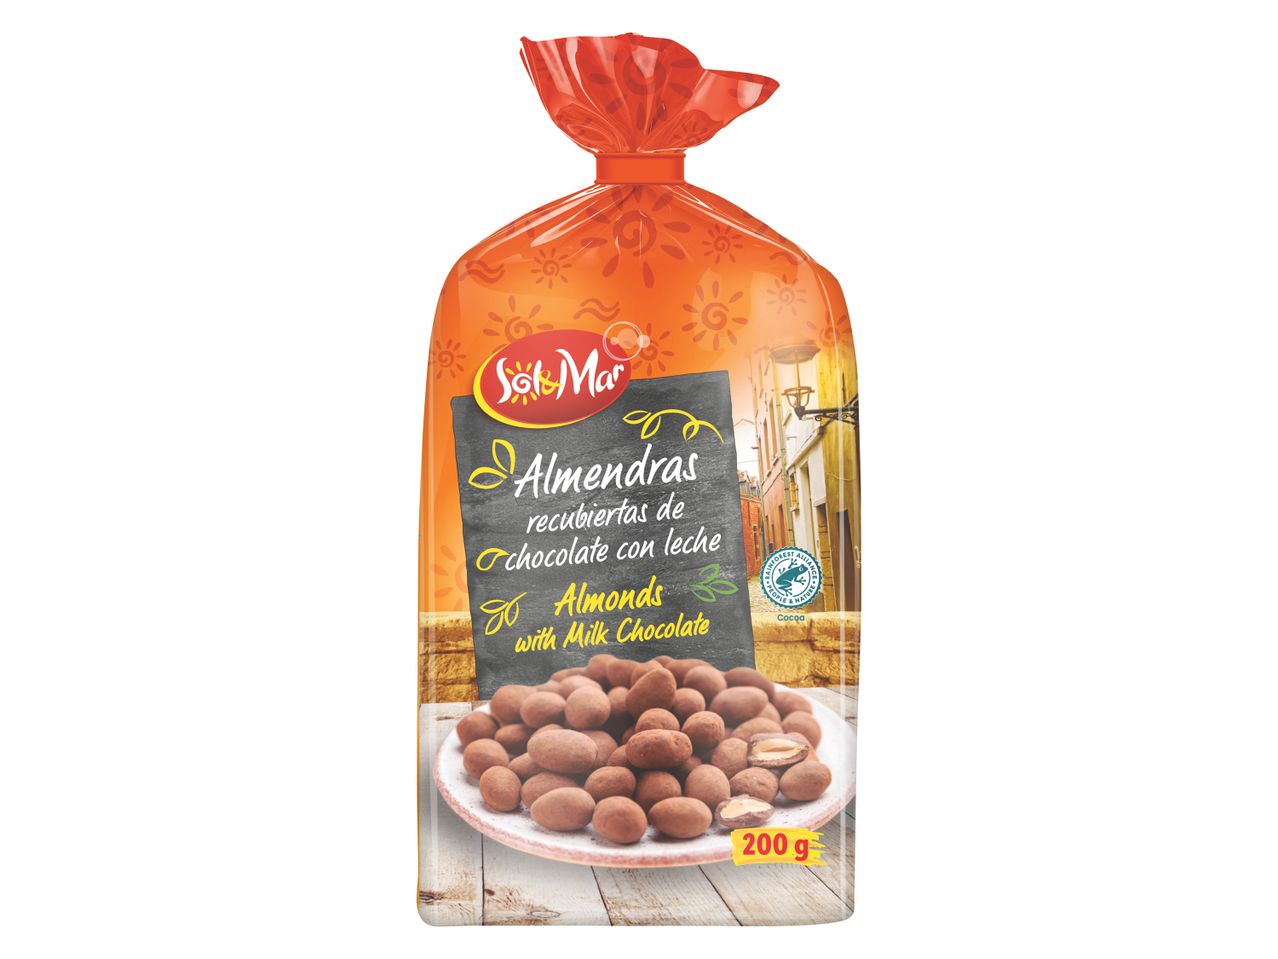 Go to full screen view: Almonds with Milk Chocolate - Image 1